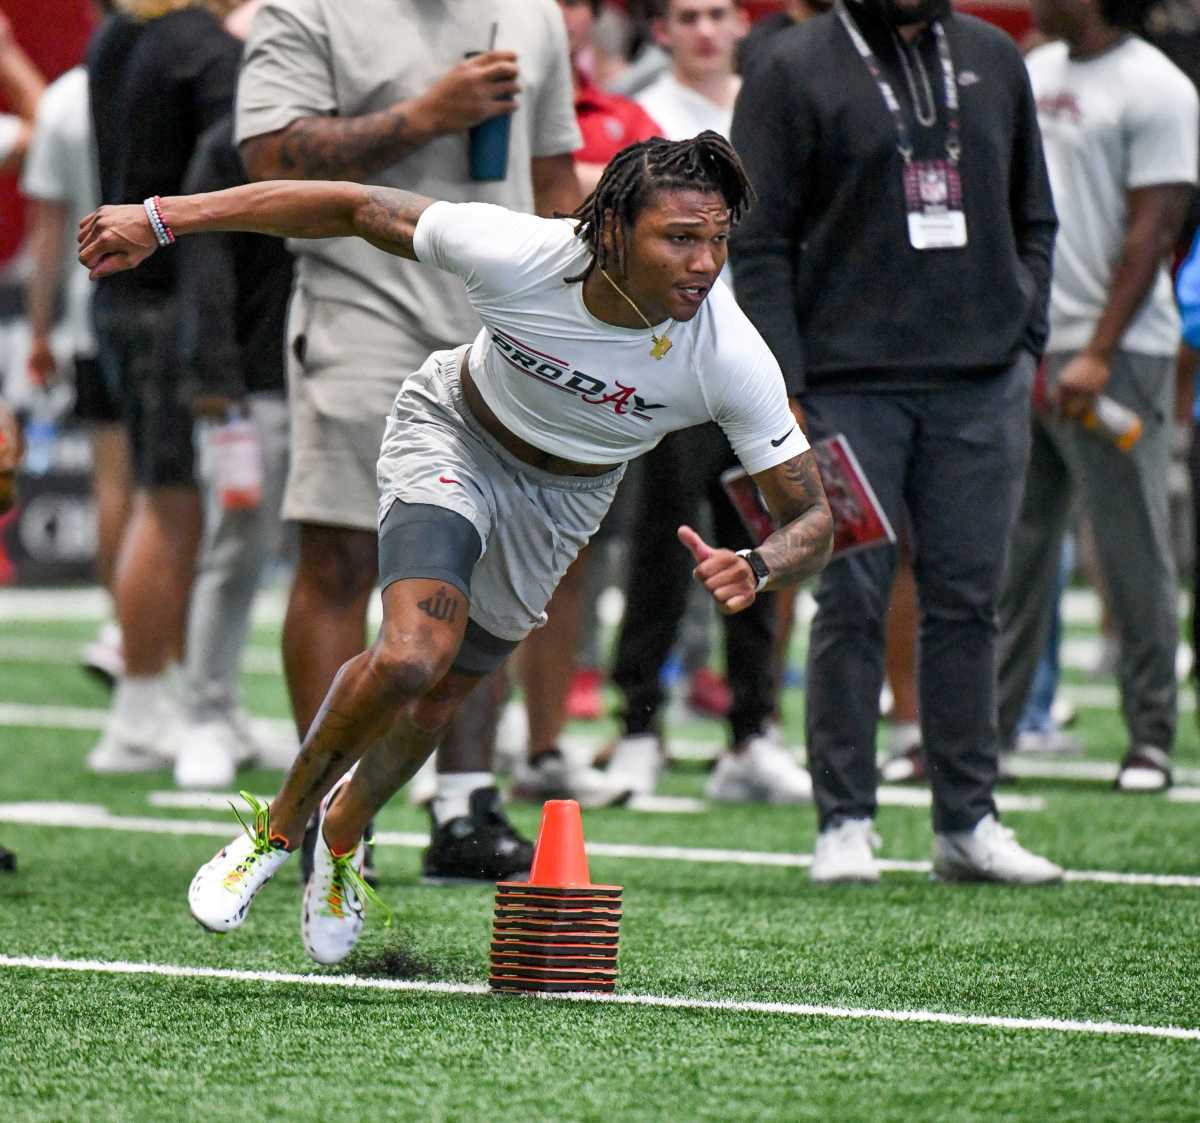 Defensive back Eli Ricks participates in a drill during Pro Day at Hank Crisp Indoor Practice Facility on the campus of the University of Alabama.